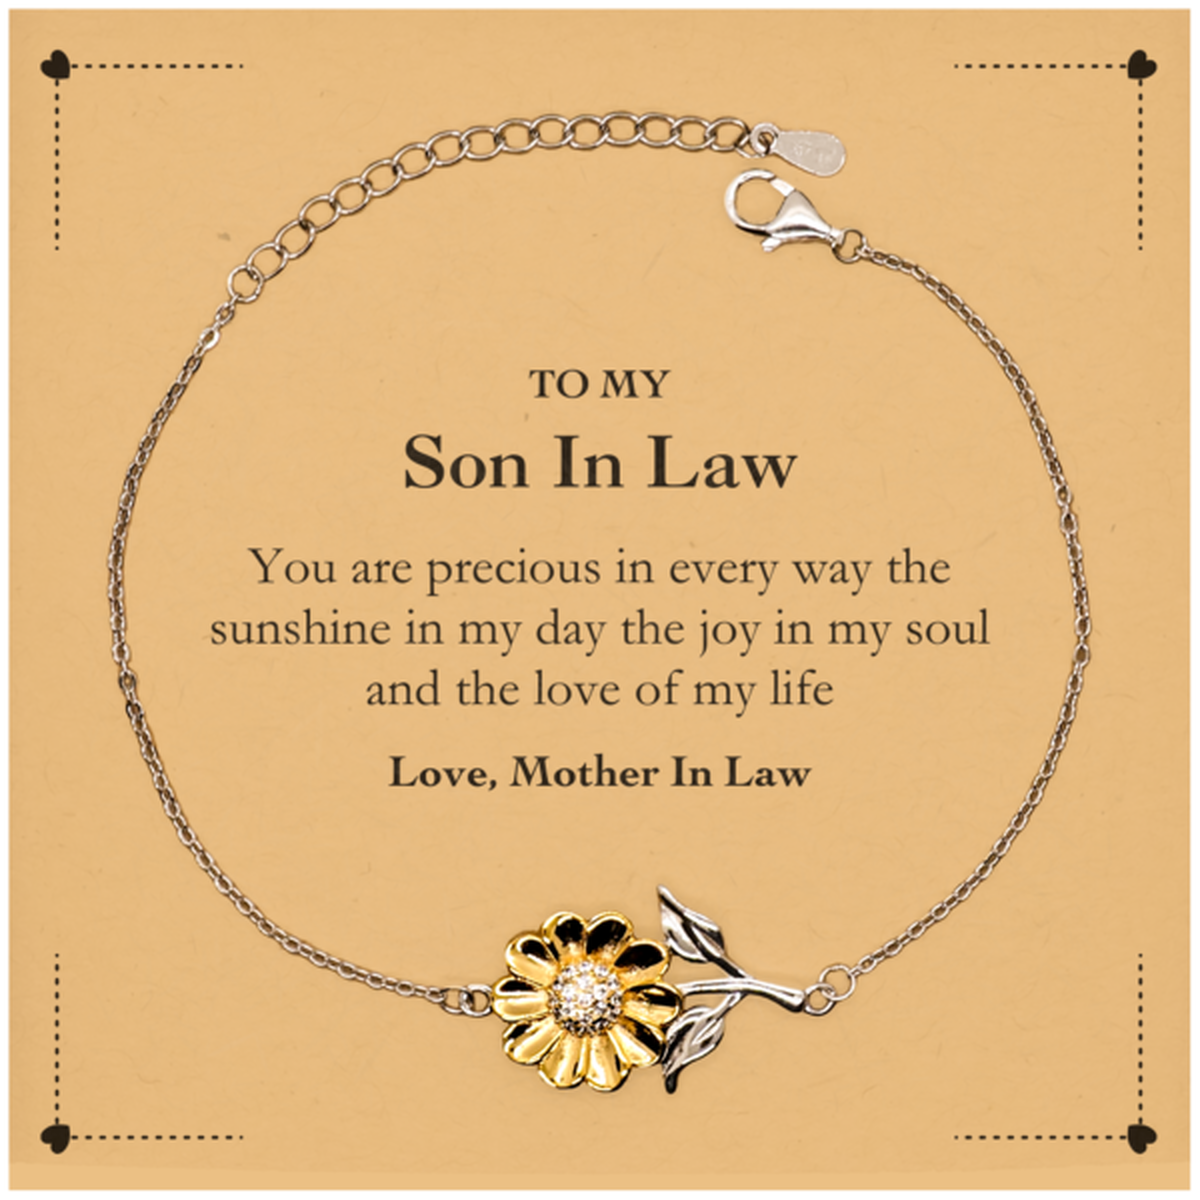 Graduation Gifts for Son In Law Sunflower Bracelet Present from Mother In Law, Christmas Son In Law Birthday Gifts Son In Law You are precious in every way the sunshine in my day. Love, Mother In Law